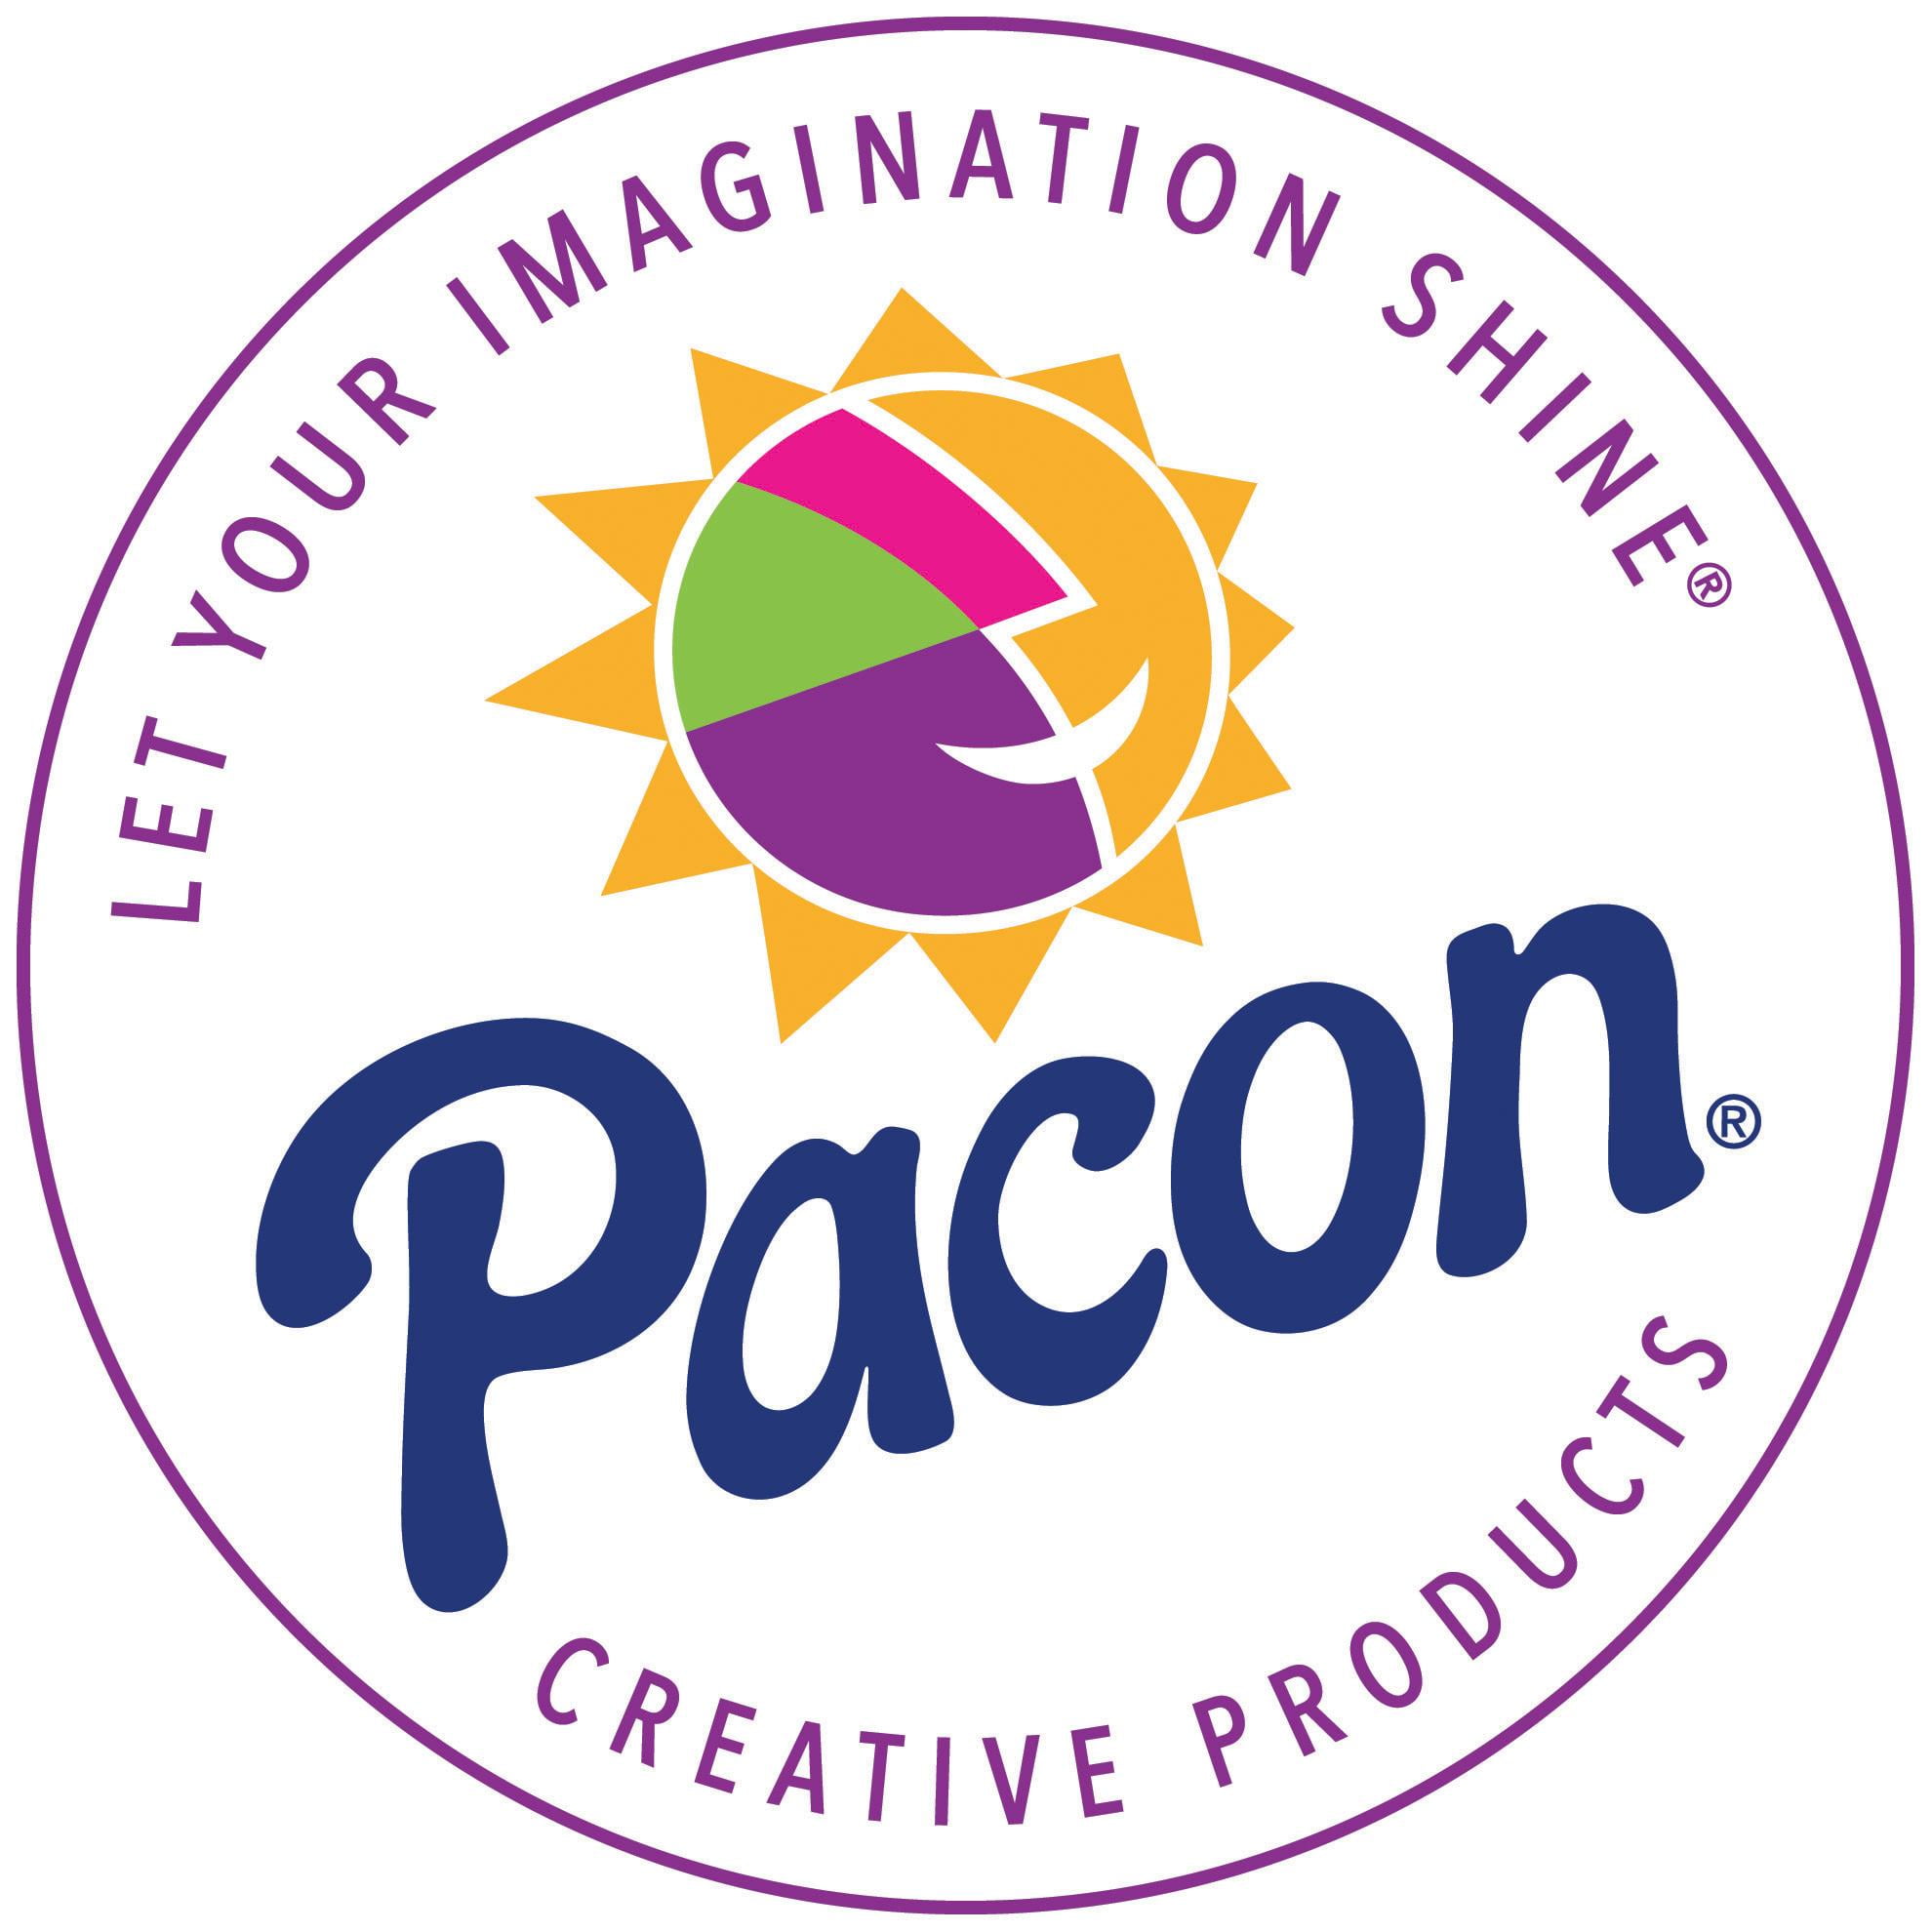 Pacon® Fadeless® Designs Paper Rolls, Clouds